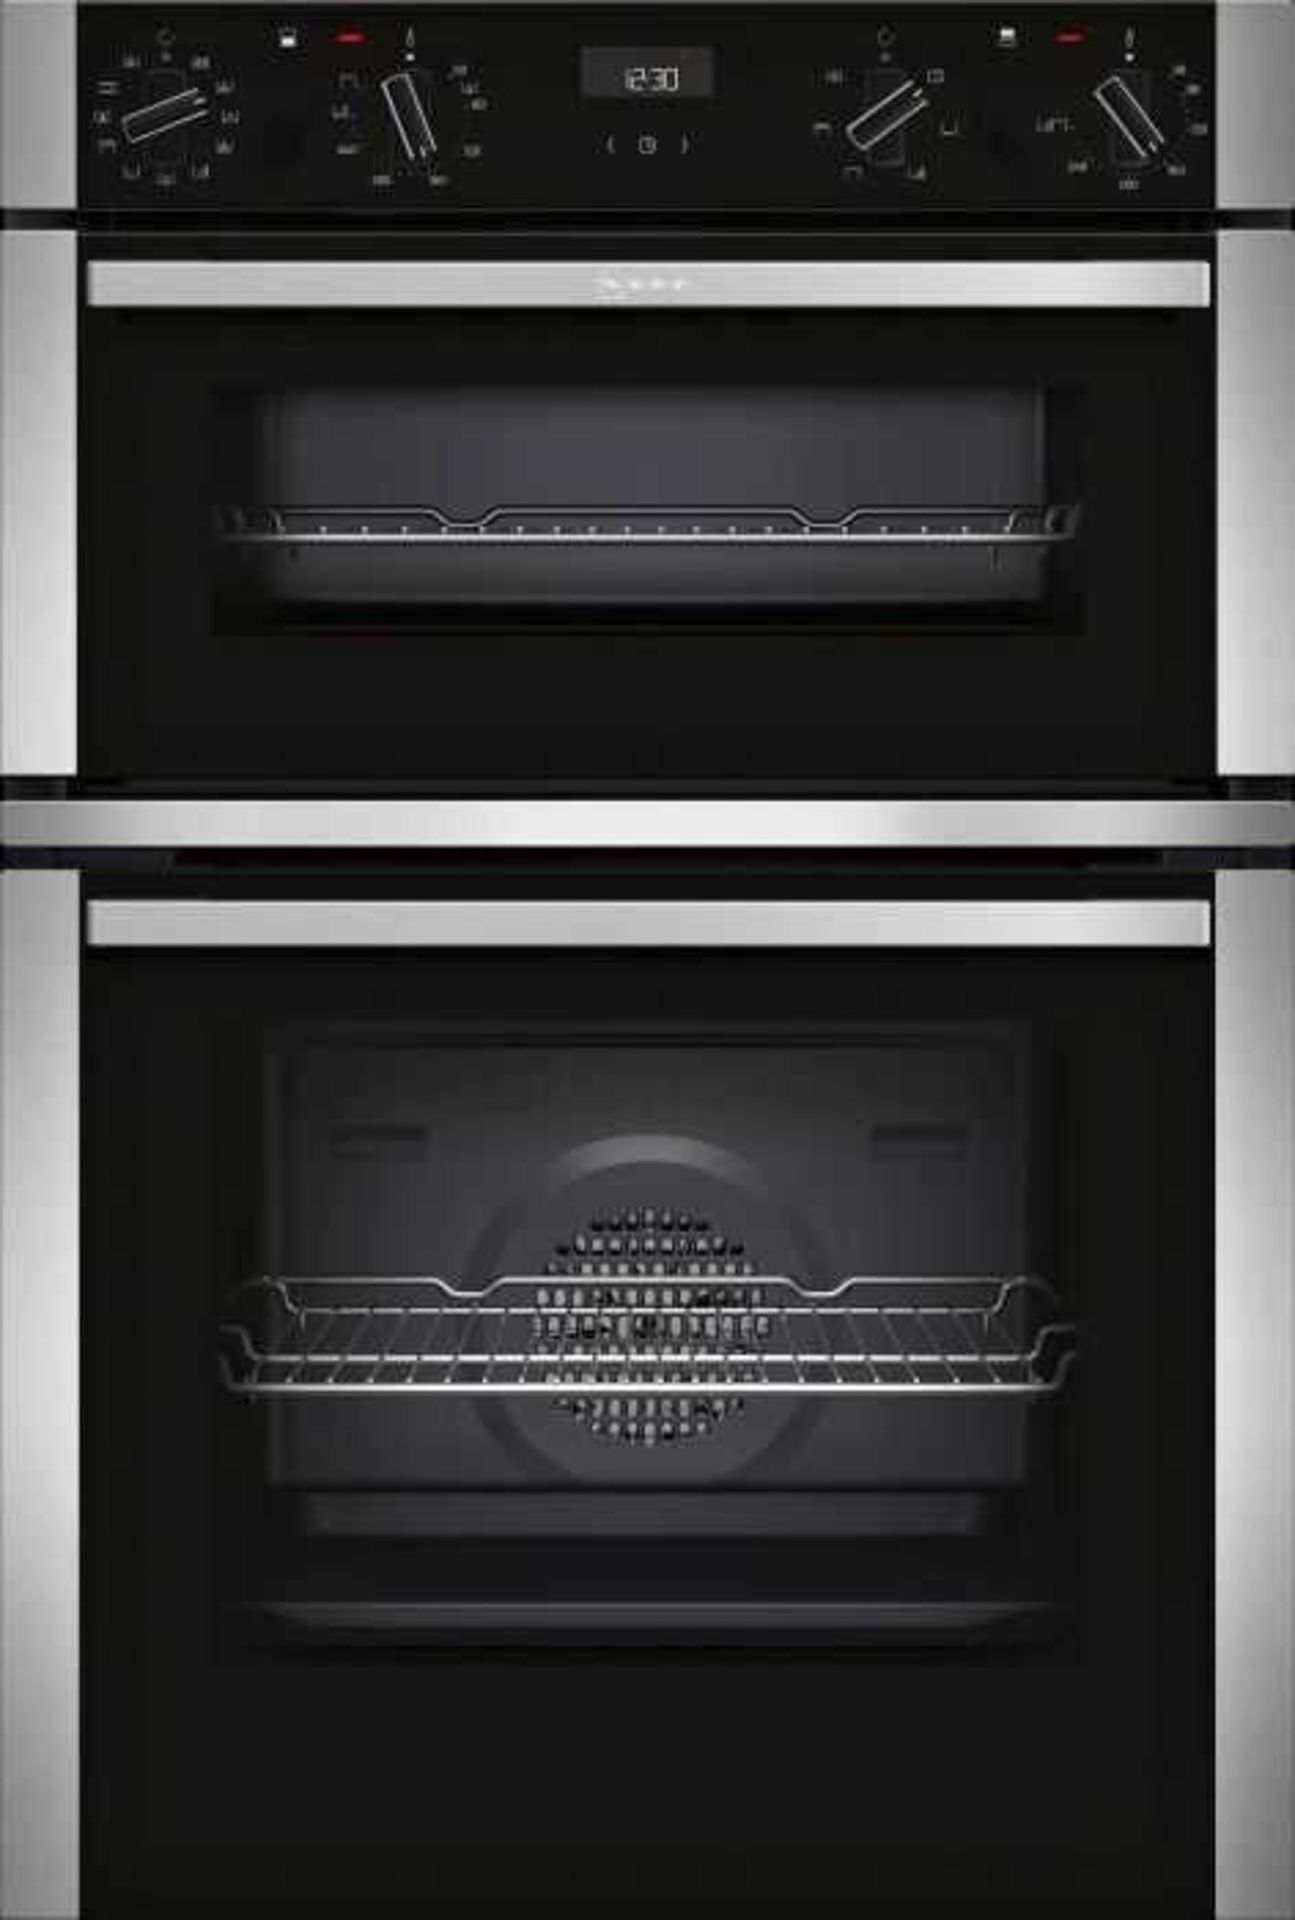 RRP £750 Neff U1Ace5Hn0B Built In Double Oven Electric - Stainless Steel / Black